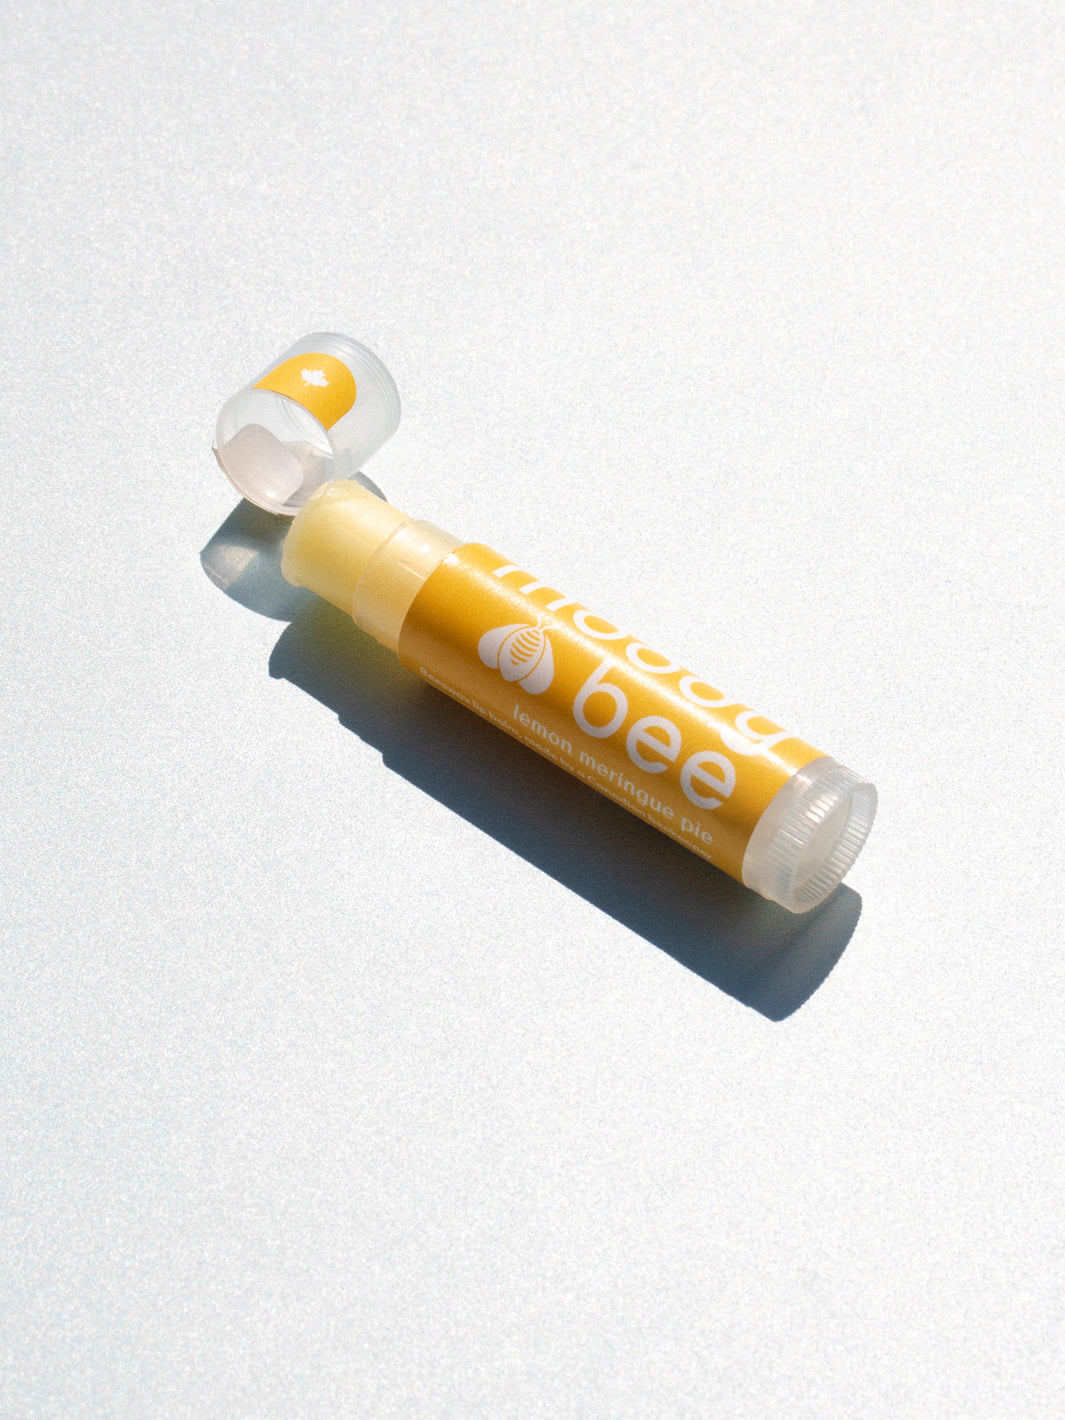 lemon meringue pie - lip balm of the month! 40% off. (excluded from volume discounts)